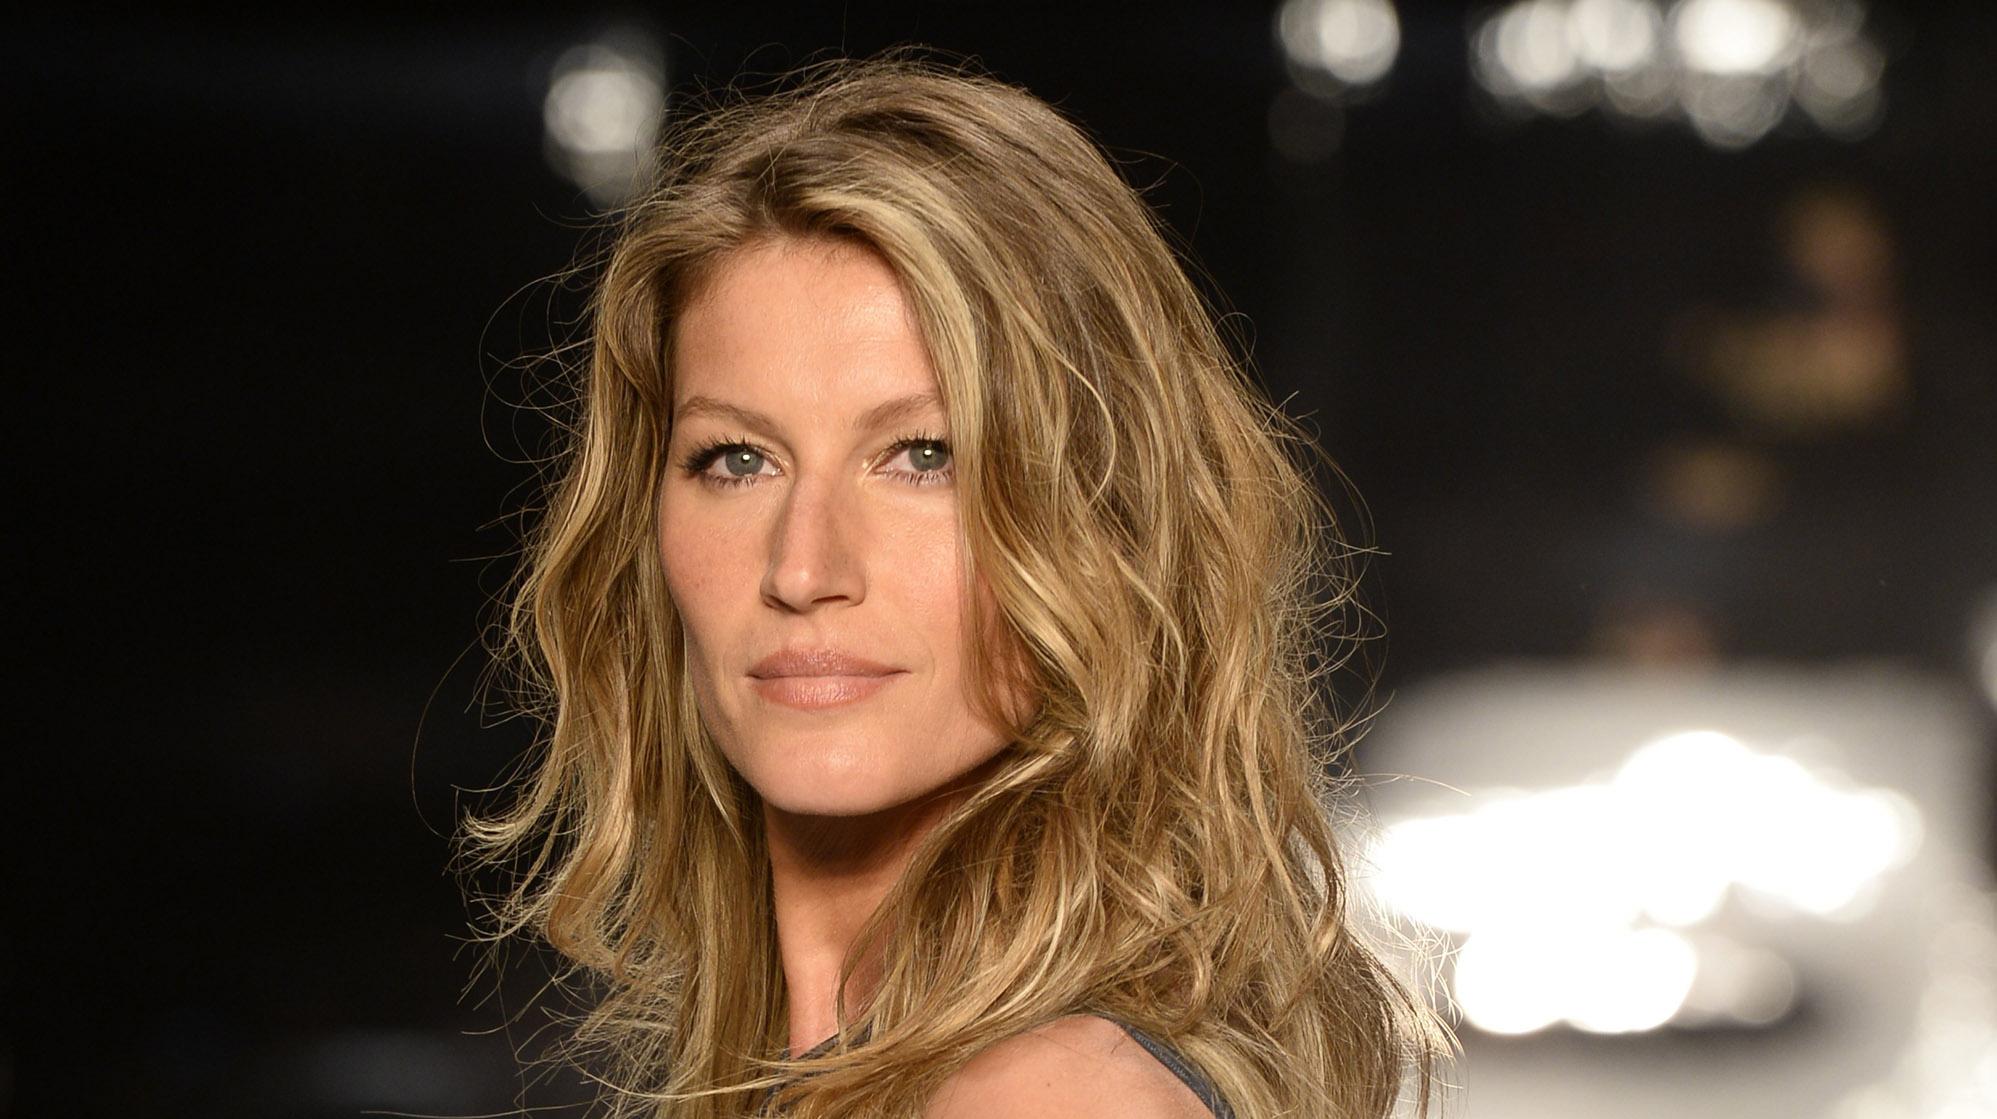 Gisele Bundchen Is Butt Naked On The Cover Of Vogue 